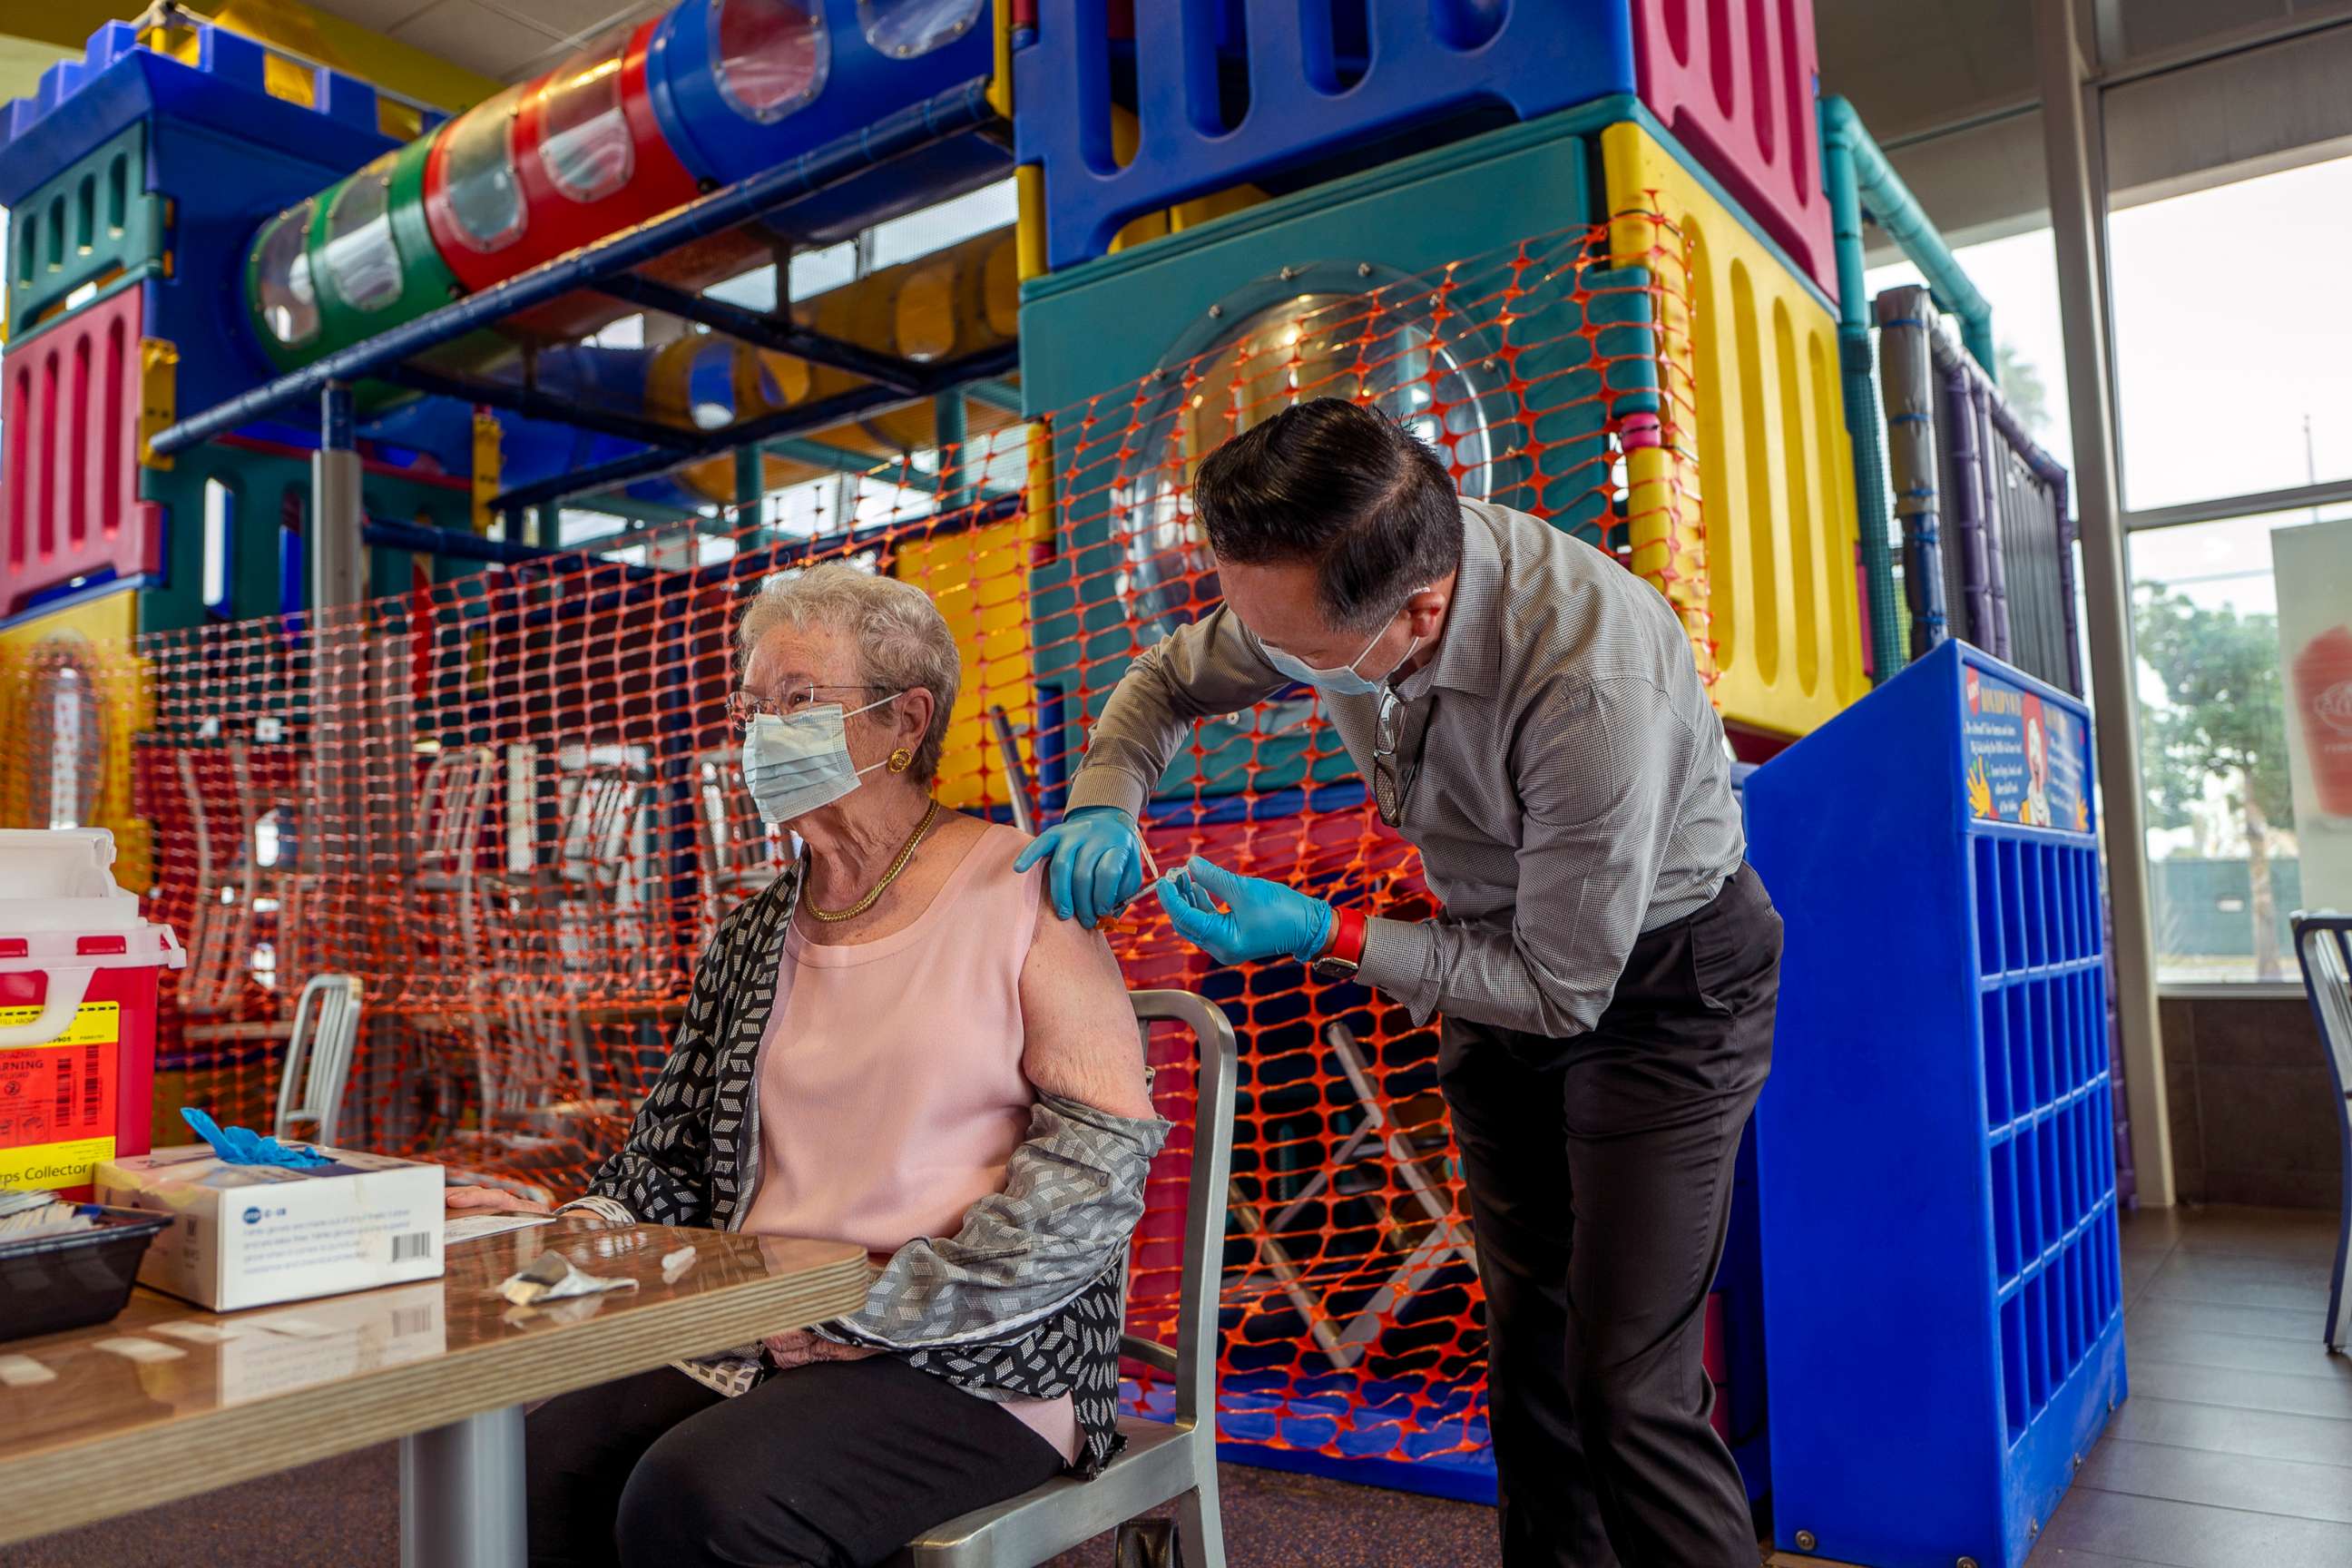 PHOTO: Pharmacist Ryan Le, right, gives Wanda Shaffer, 83, a booster shot of Pfizer-BioNTech's COVID-19 vaccine at McDonalds on Sept. 27, 2021, in Fullerton, Calif.